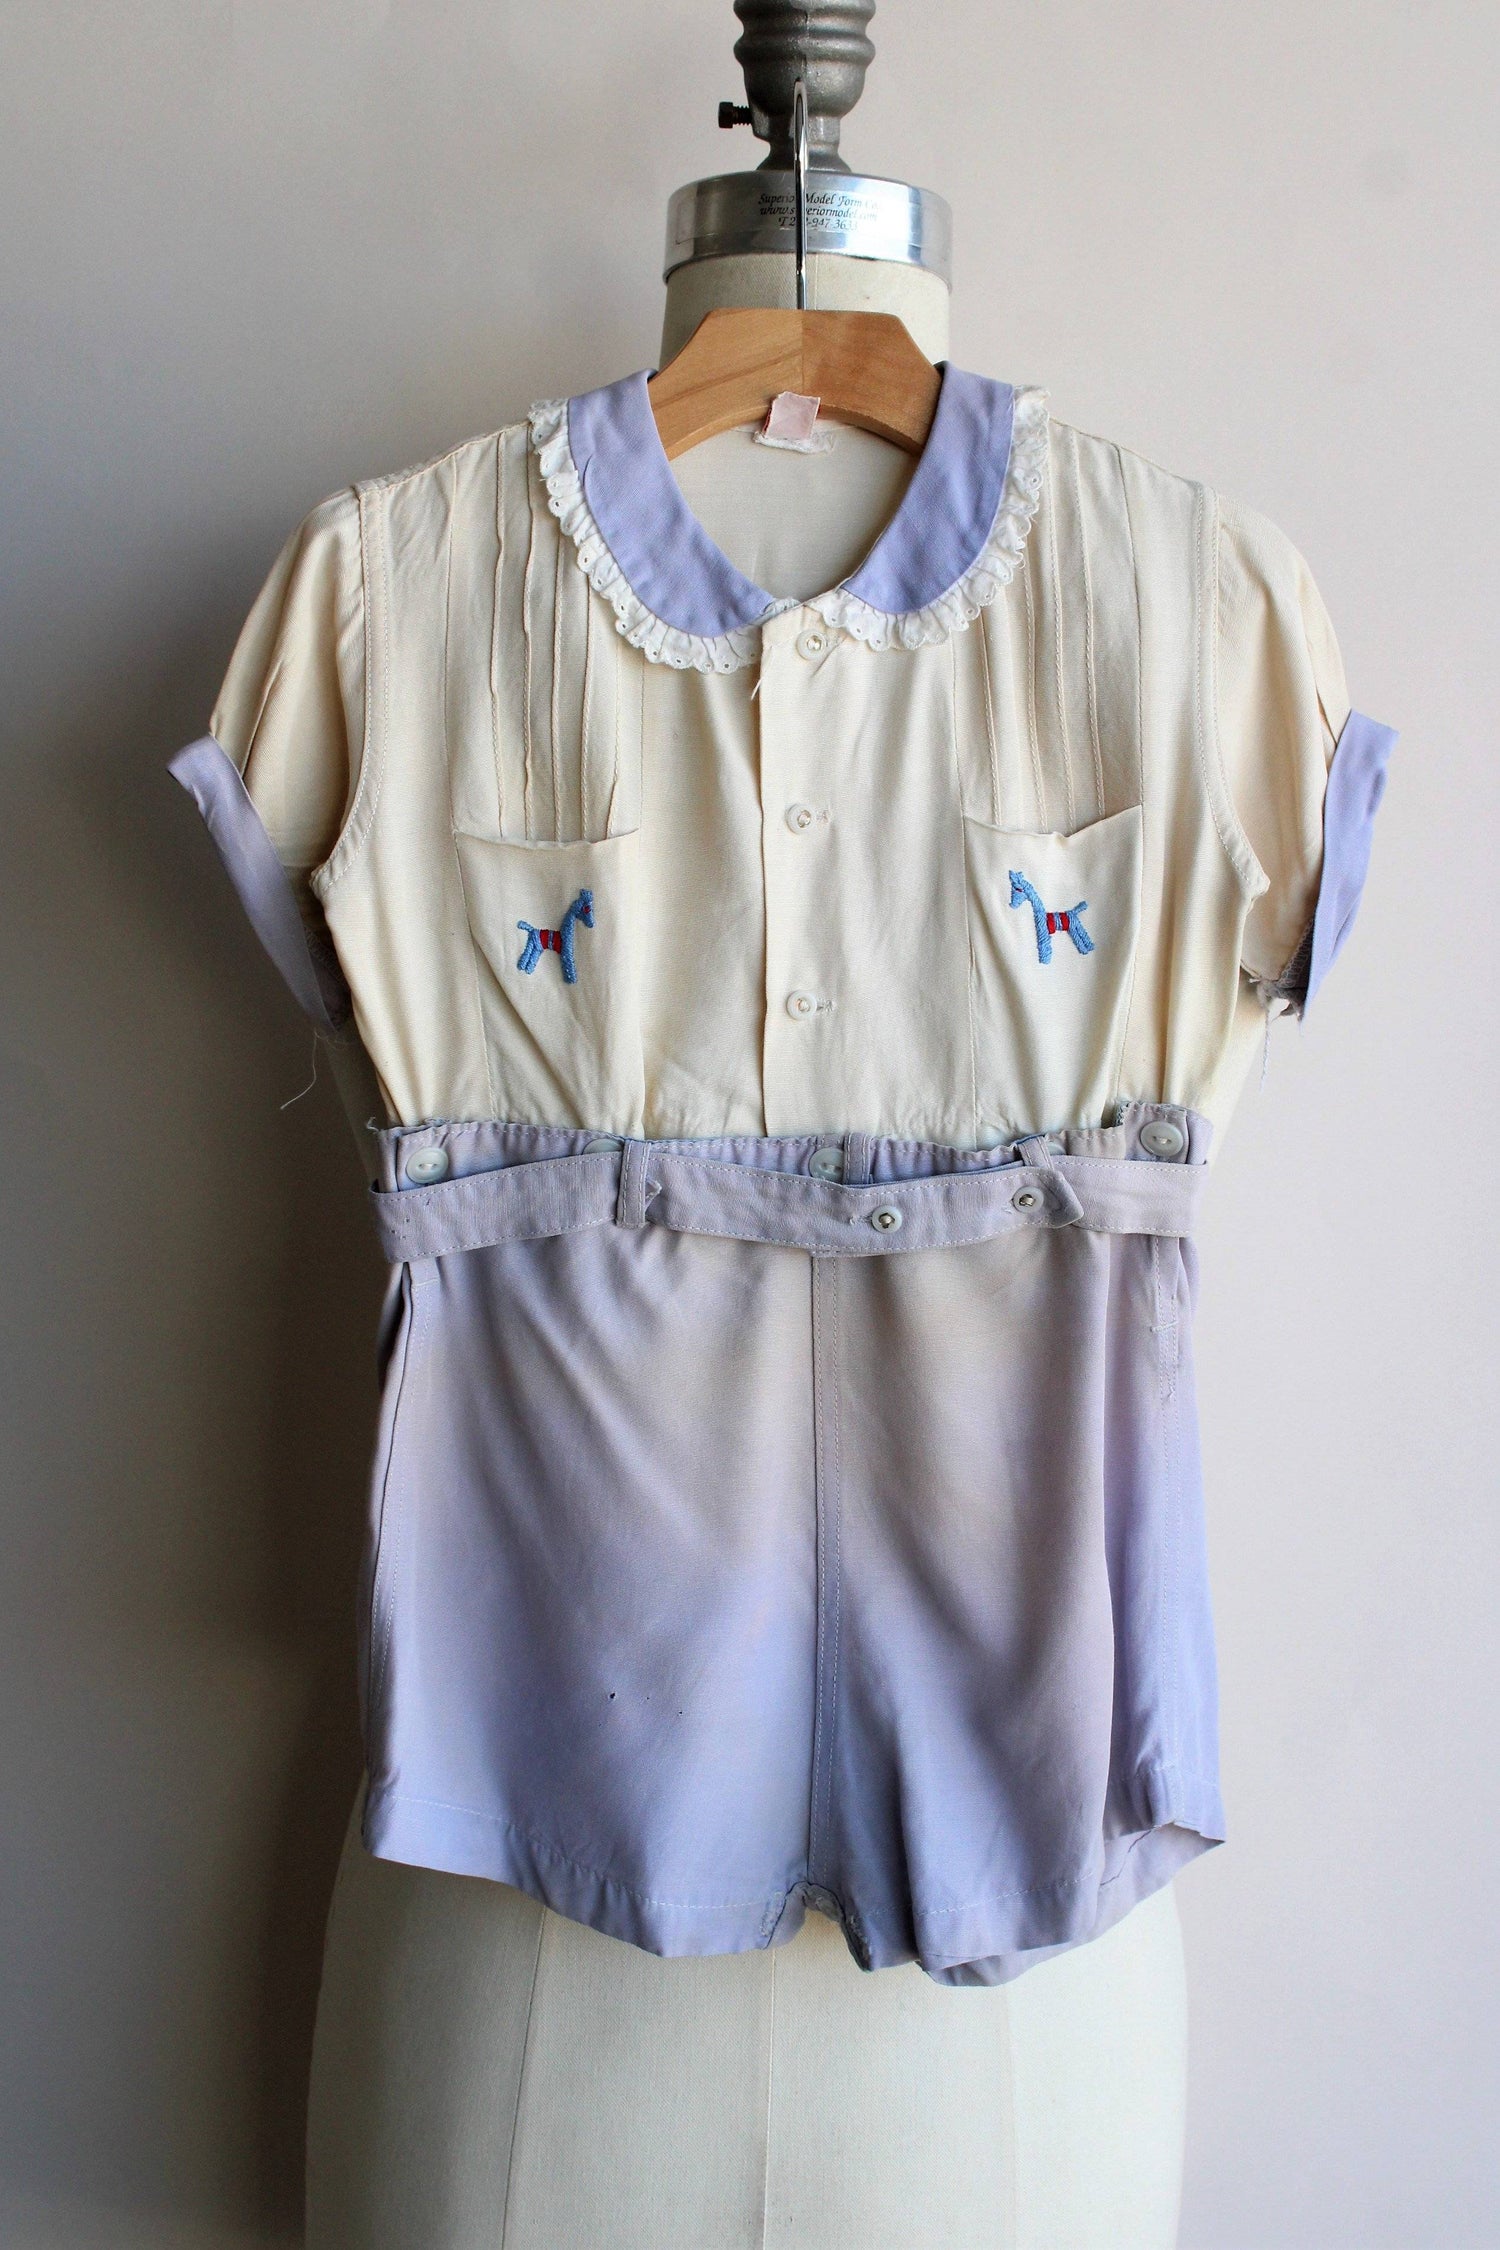 Vintage 1950s Peter Piper Unisex Baby Shorts And Top-Toadstool Farm Vintage-baby,baby onsie,horse embroidery,layette,layette infaant,outfit,peter piper,shorts and top,Vintage,Vintage Clothing